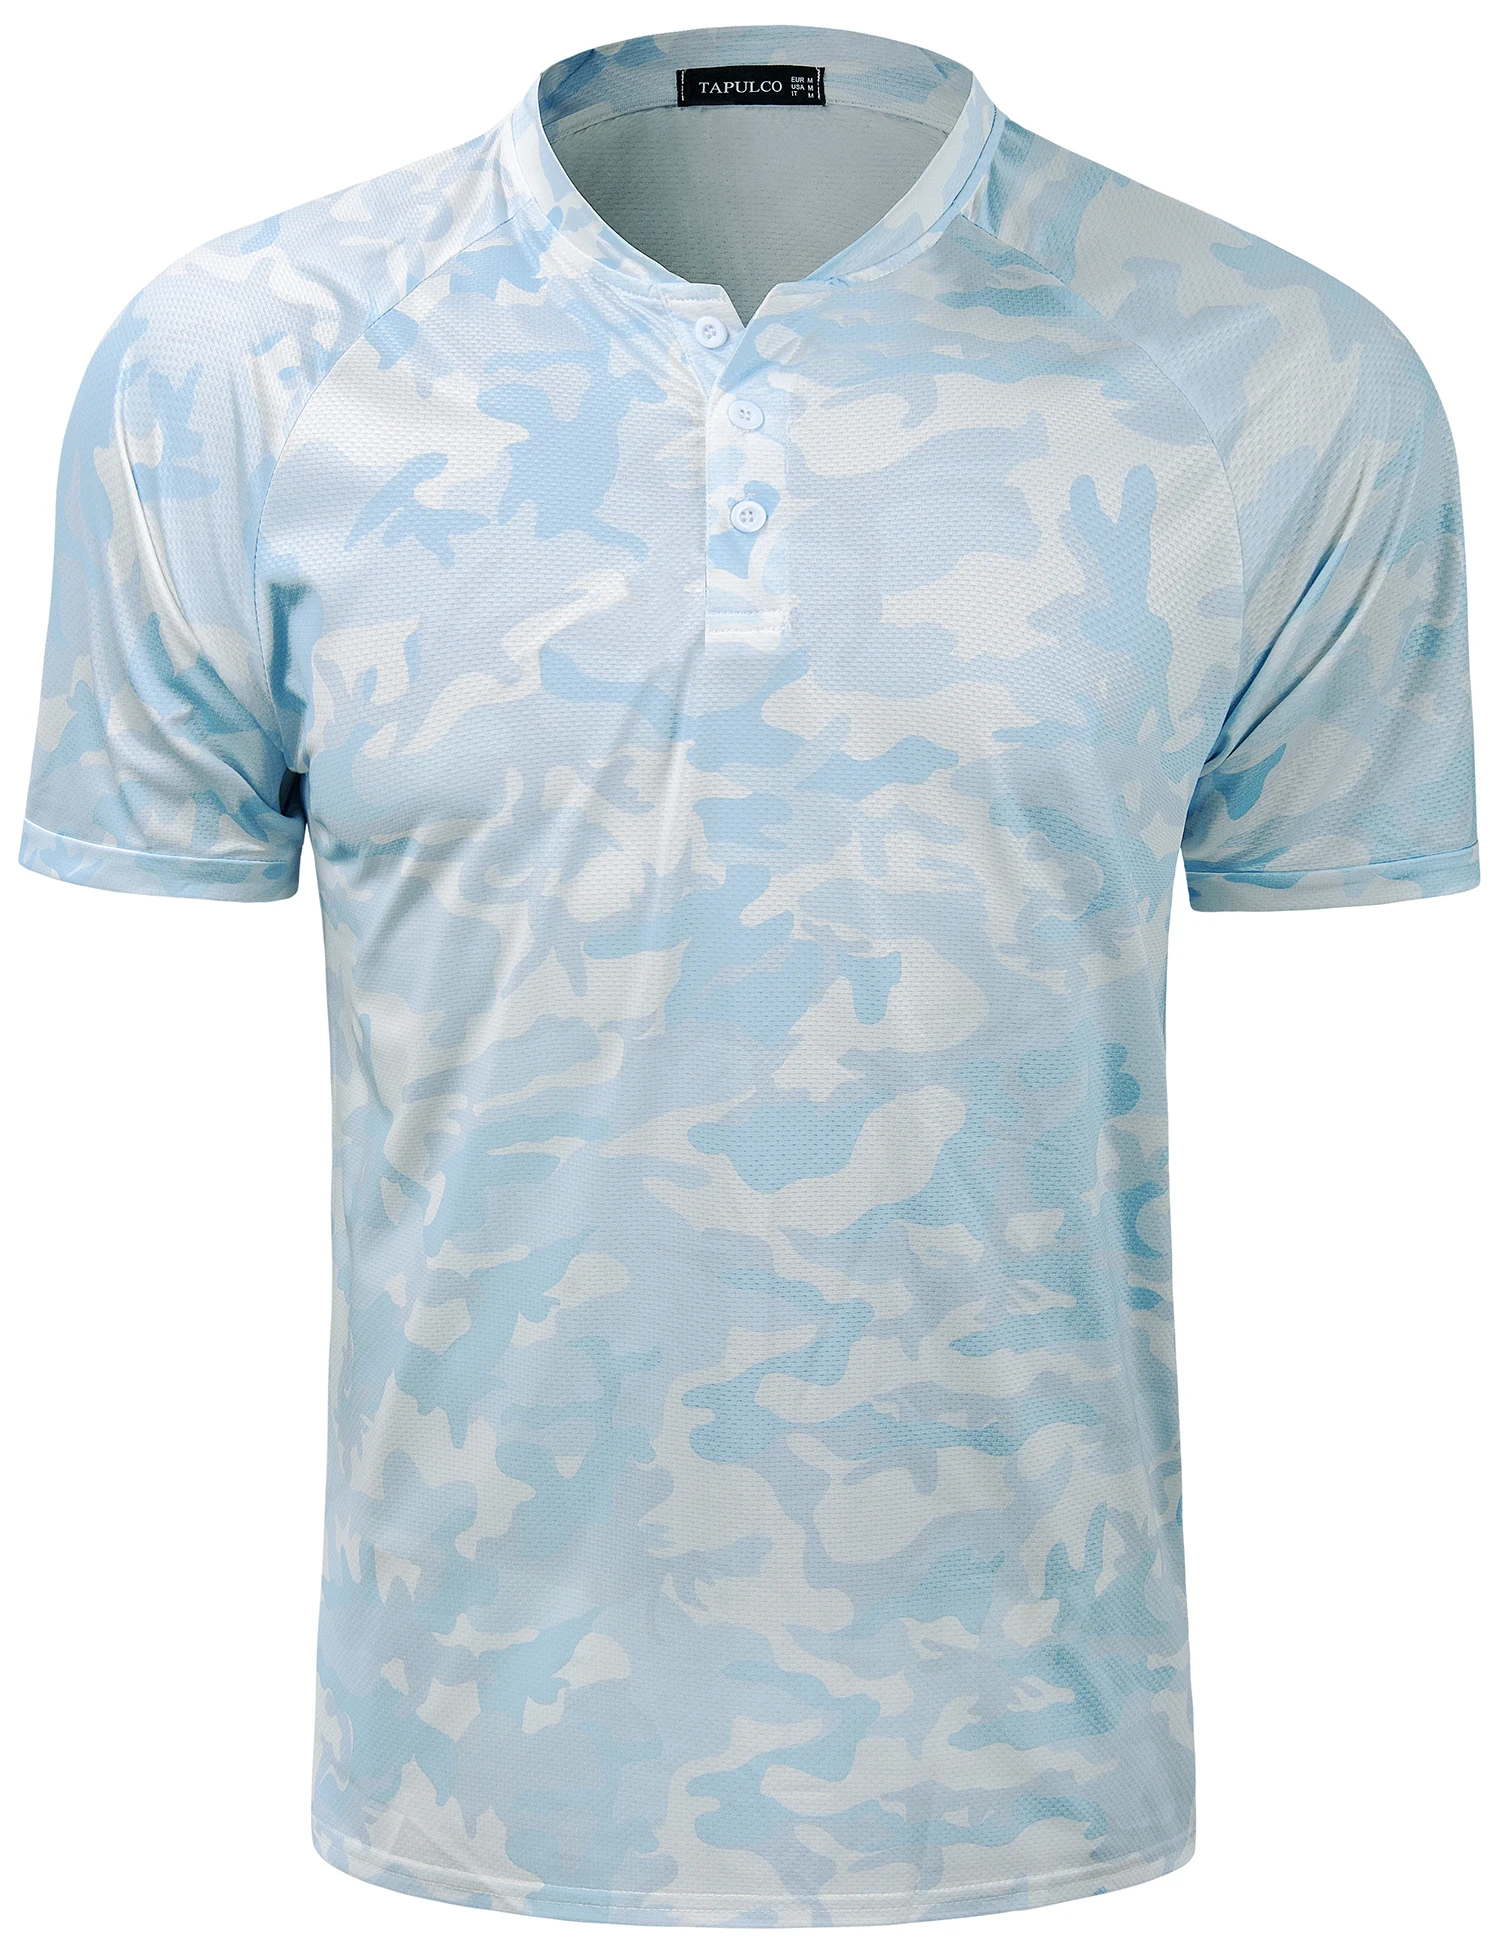 Men blade collar golf polo shirts UPF 50+ sun protection camouflage printing light weight quick dry tshirt